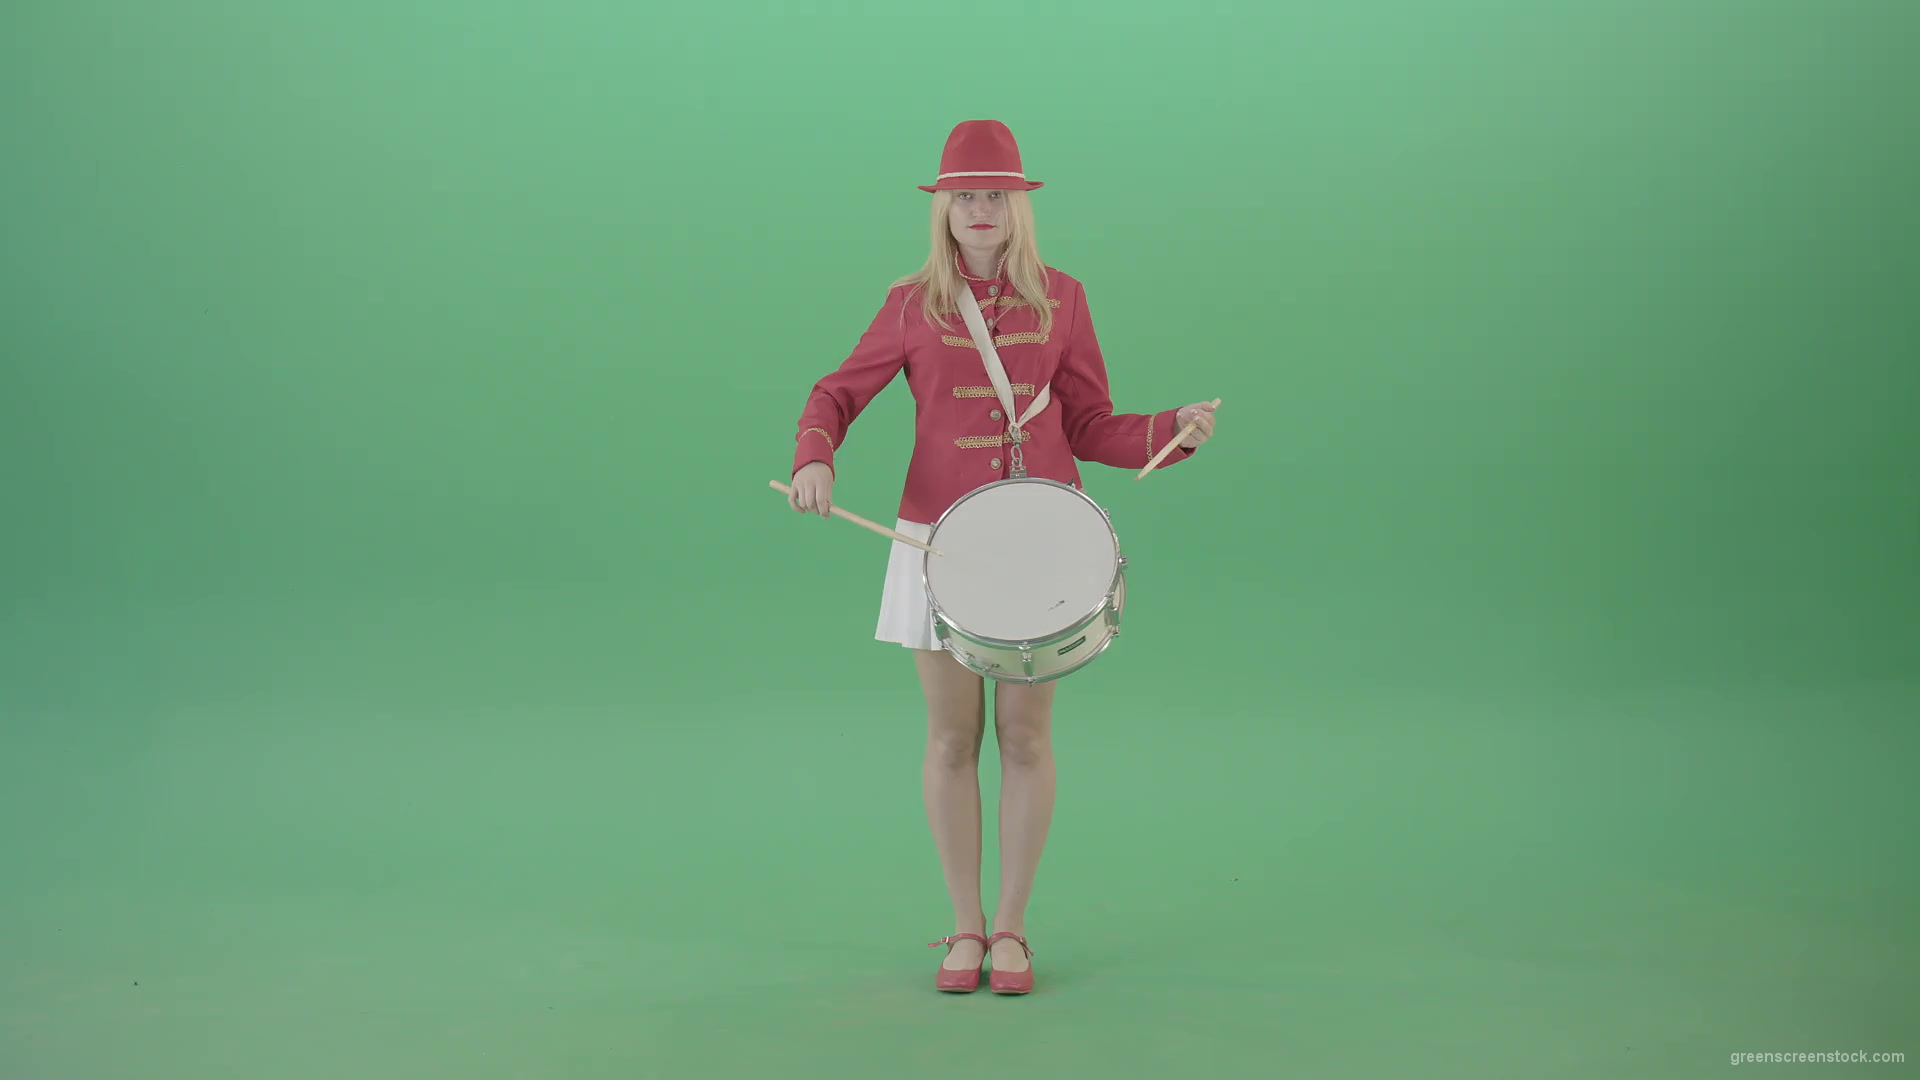 Girl-marching-and-spinning-playind-drums-on-green-screen-4K-Video-Clip-1920_001 Green Screen Stock